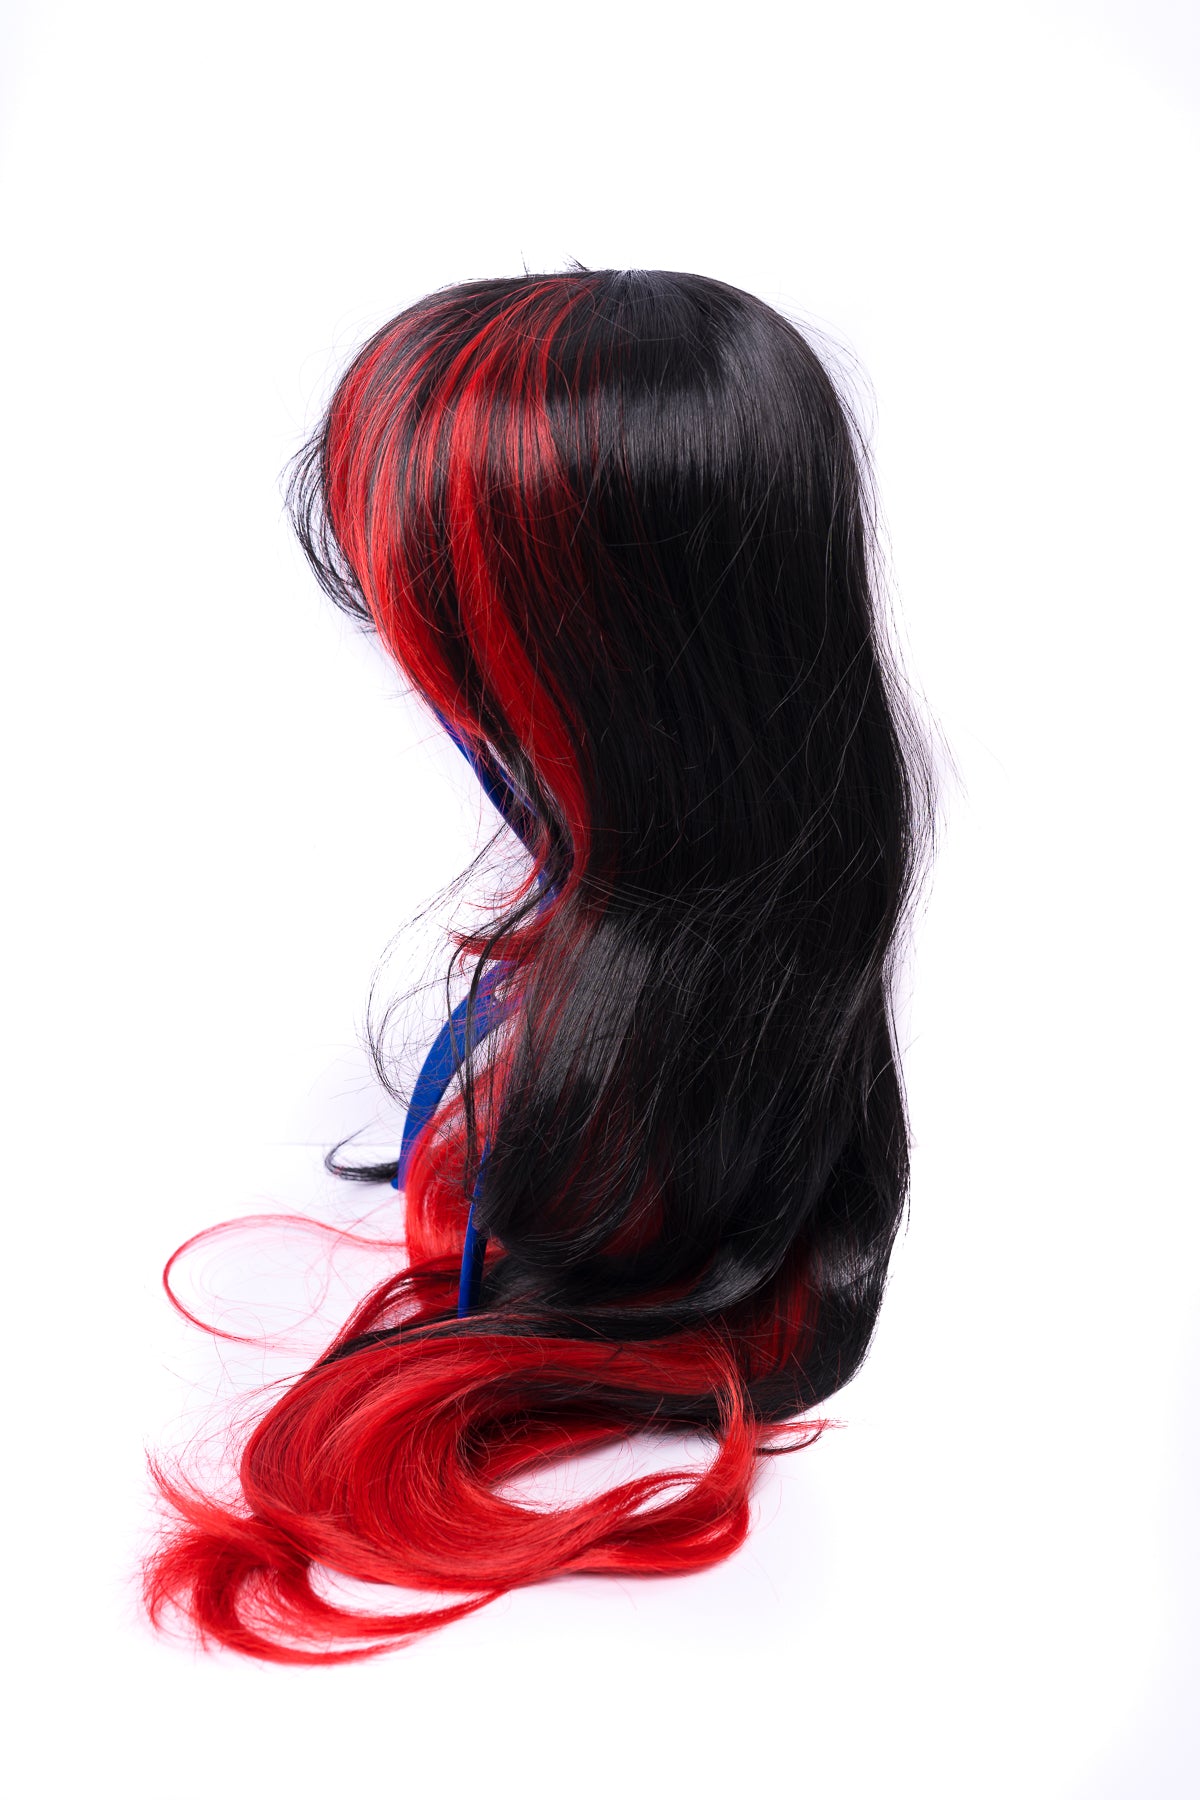 Premium Wig - Long Black and Red